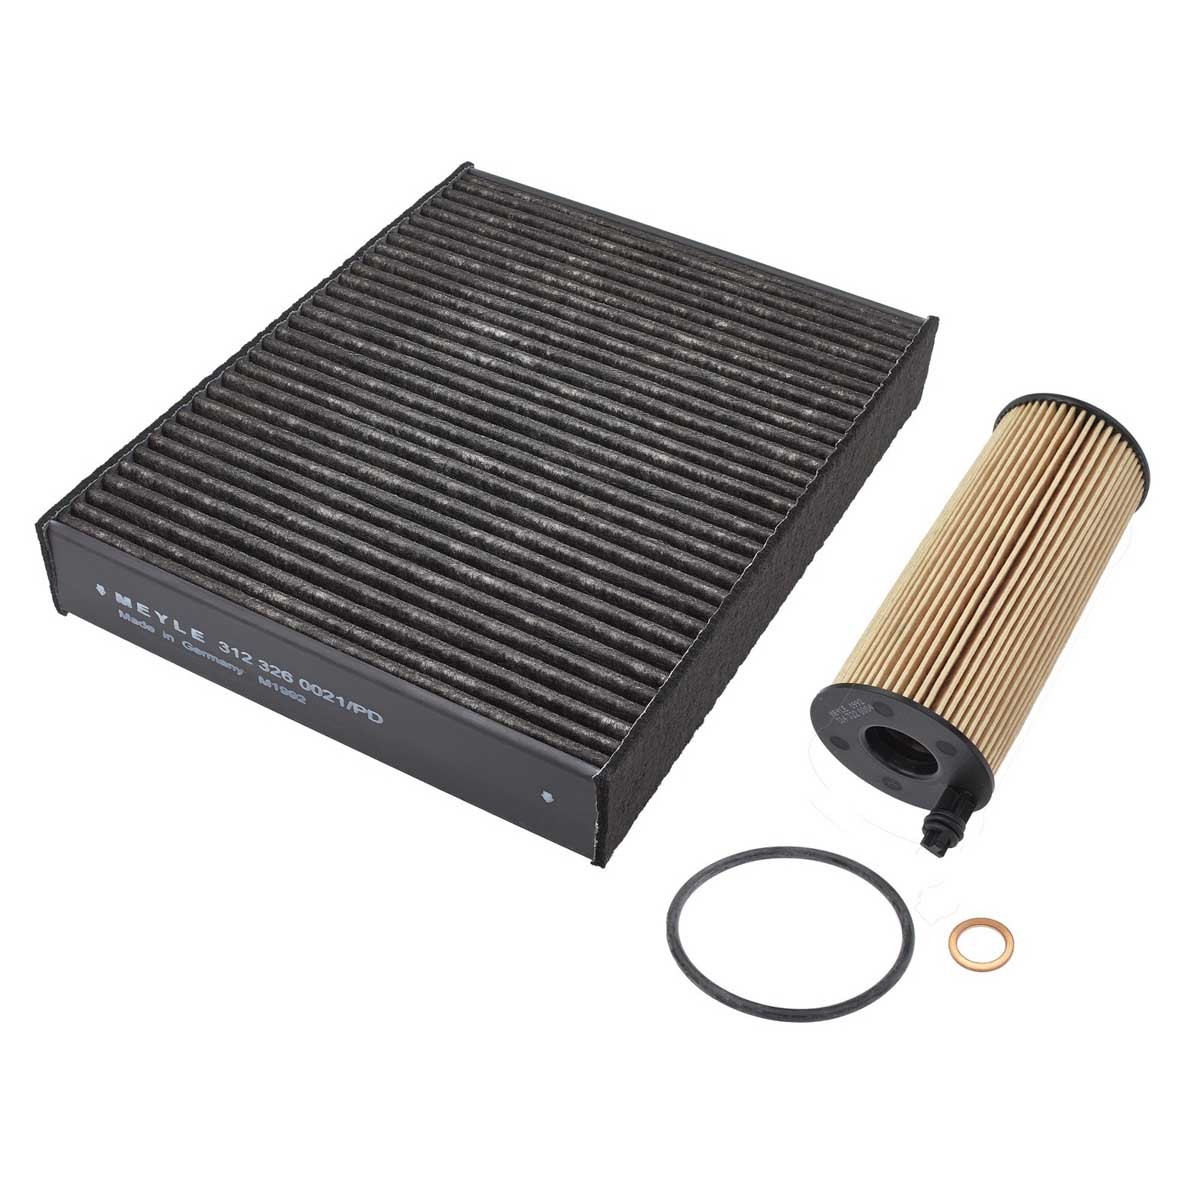 MEYLE 312 330 0001/SK Filter kit BMW experience and price